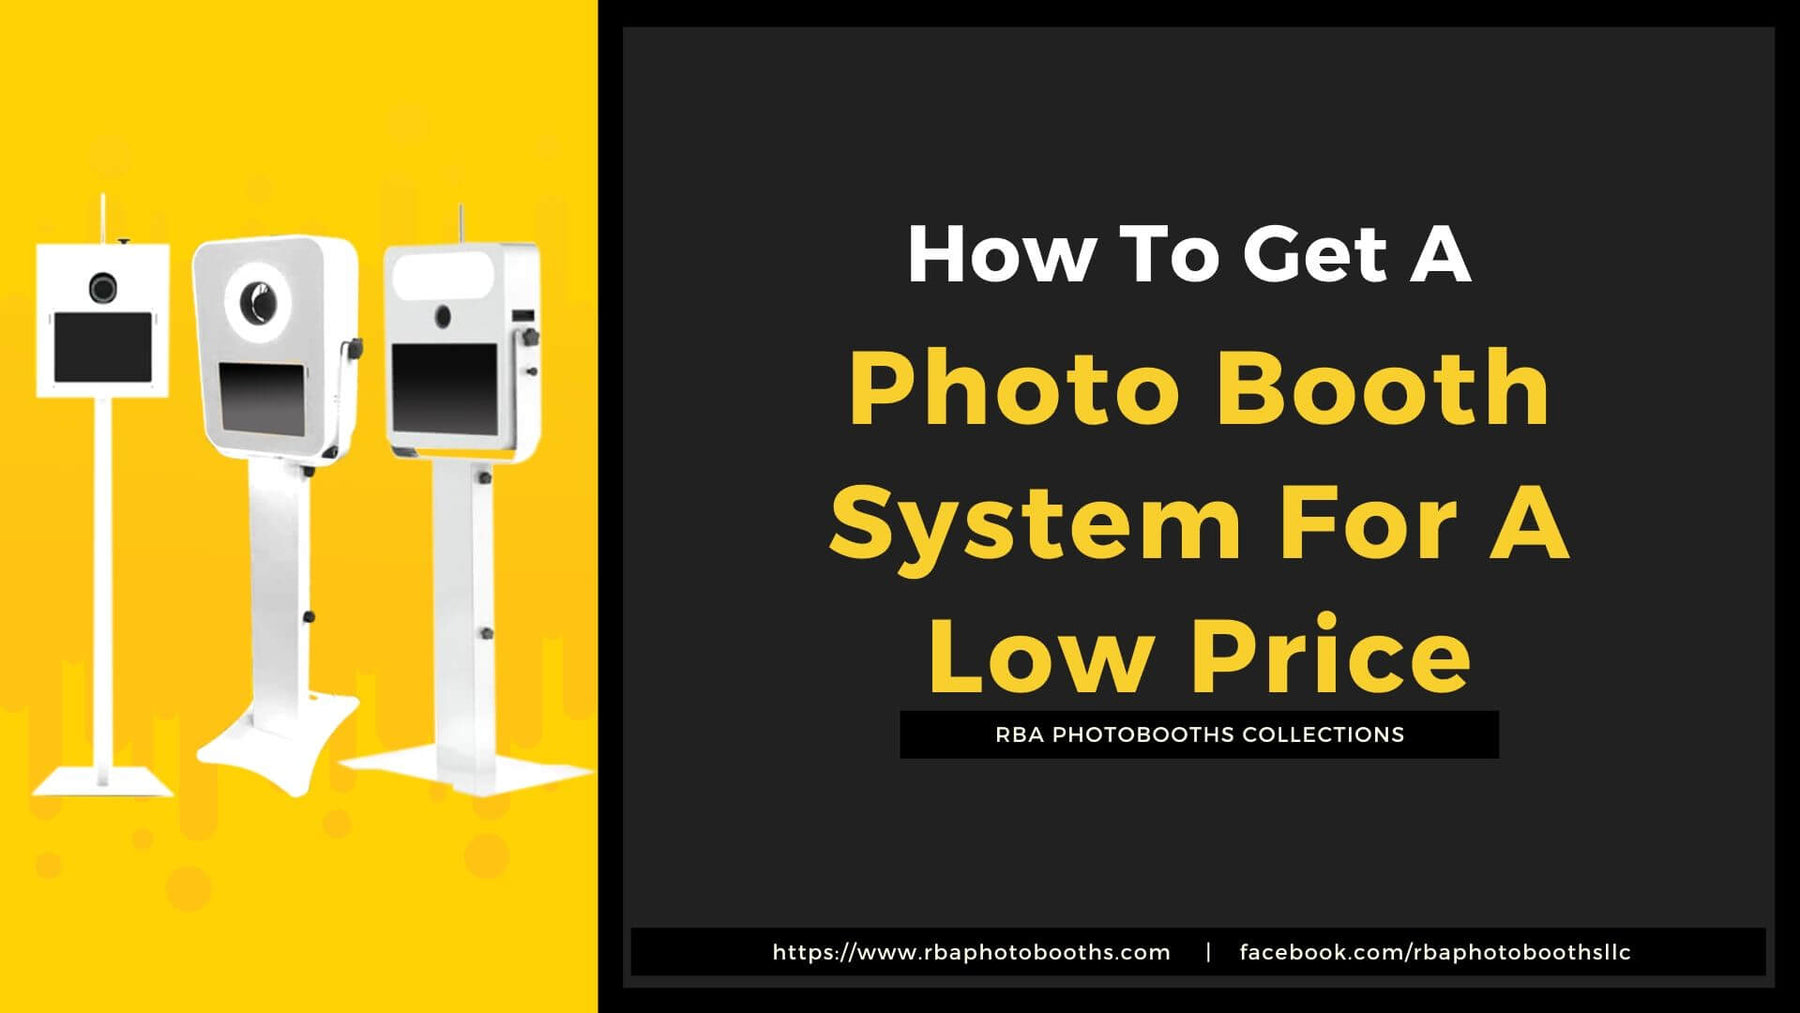 How To Get A Photo Booth System For A Low Price